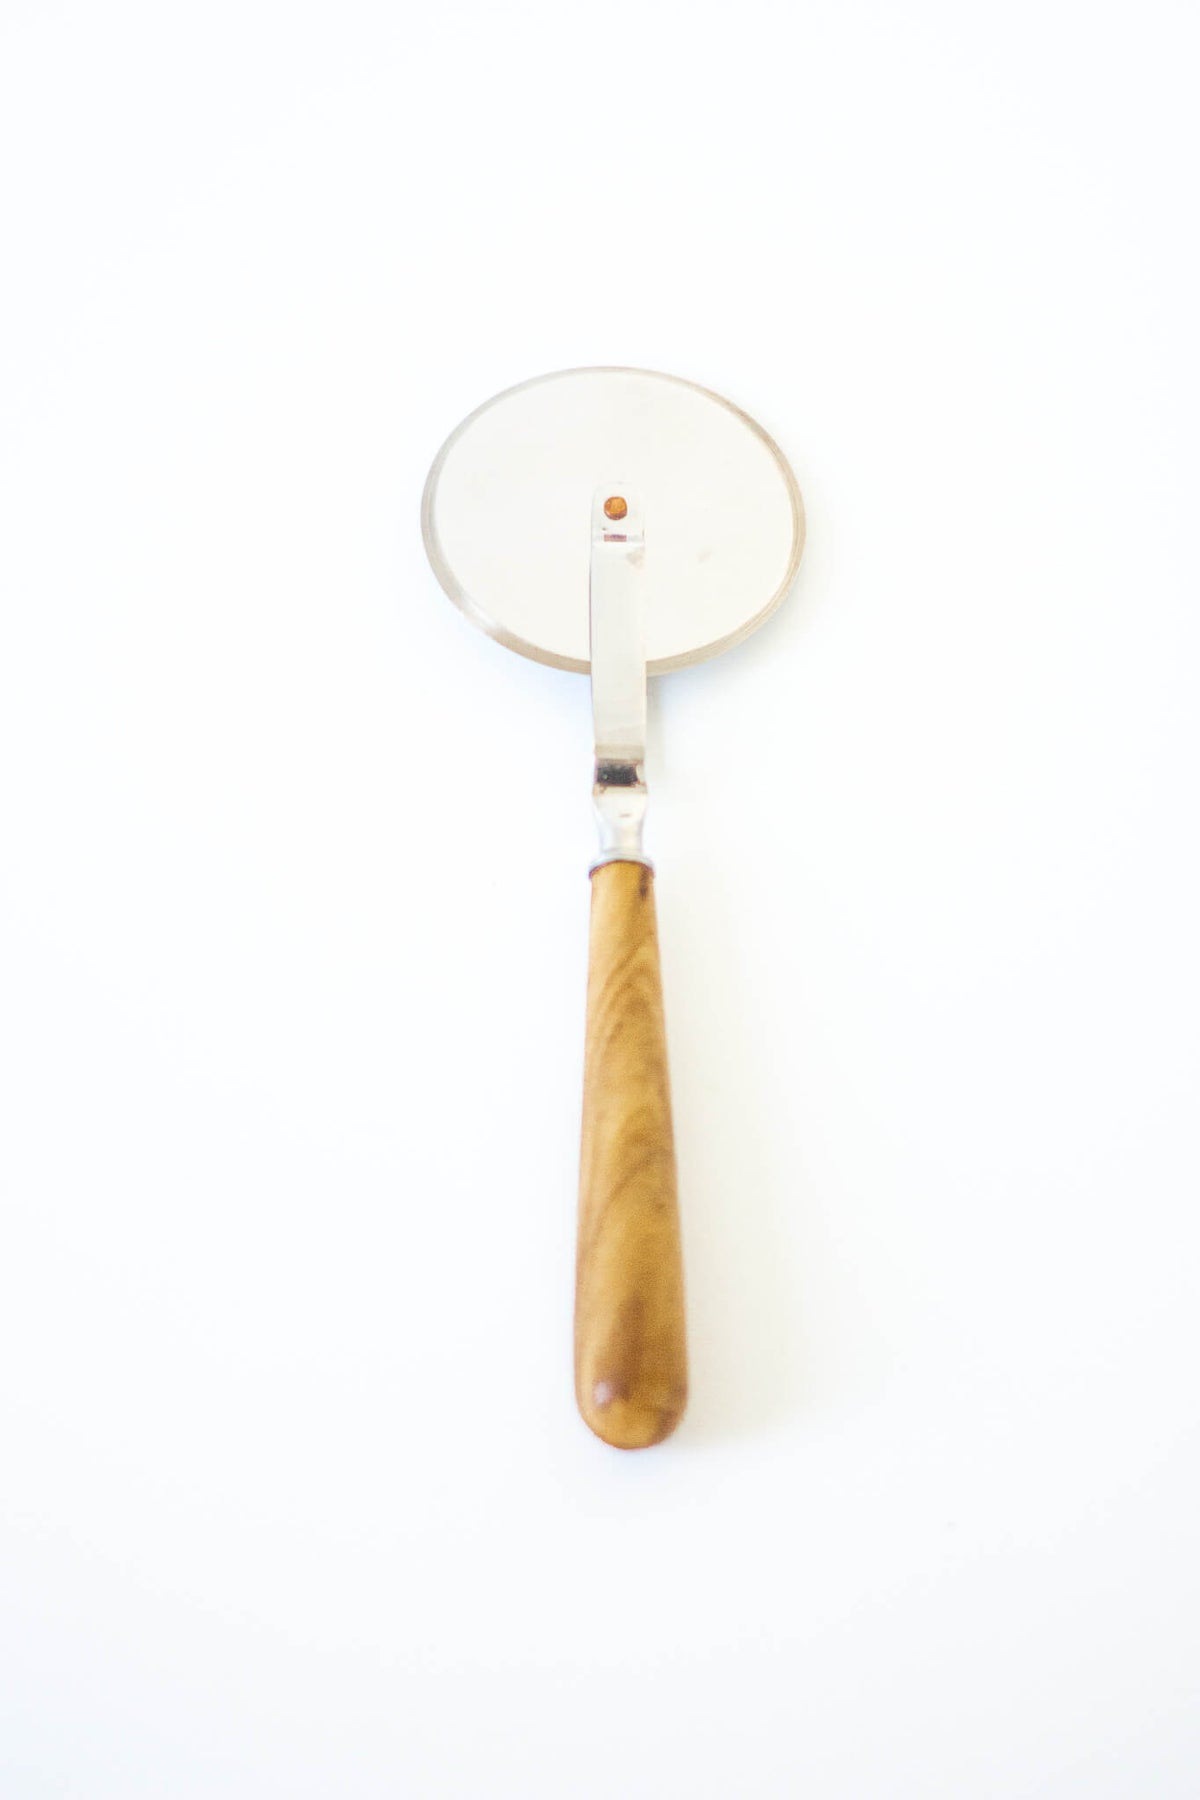 Be Home Stainless + Wood Pizza Wheel